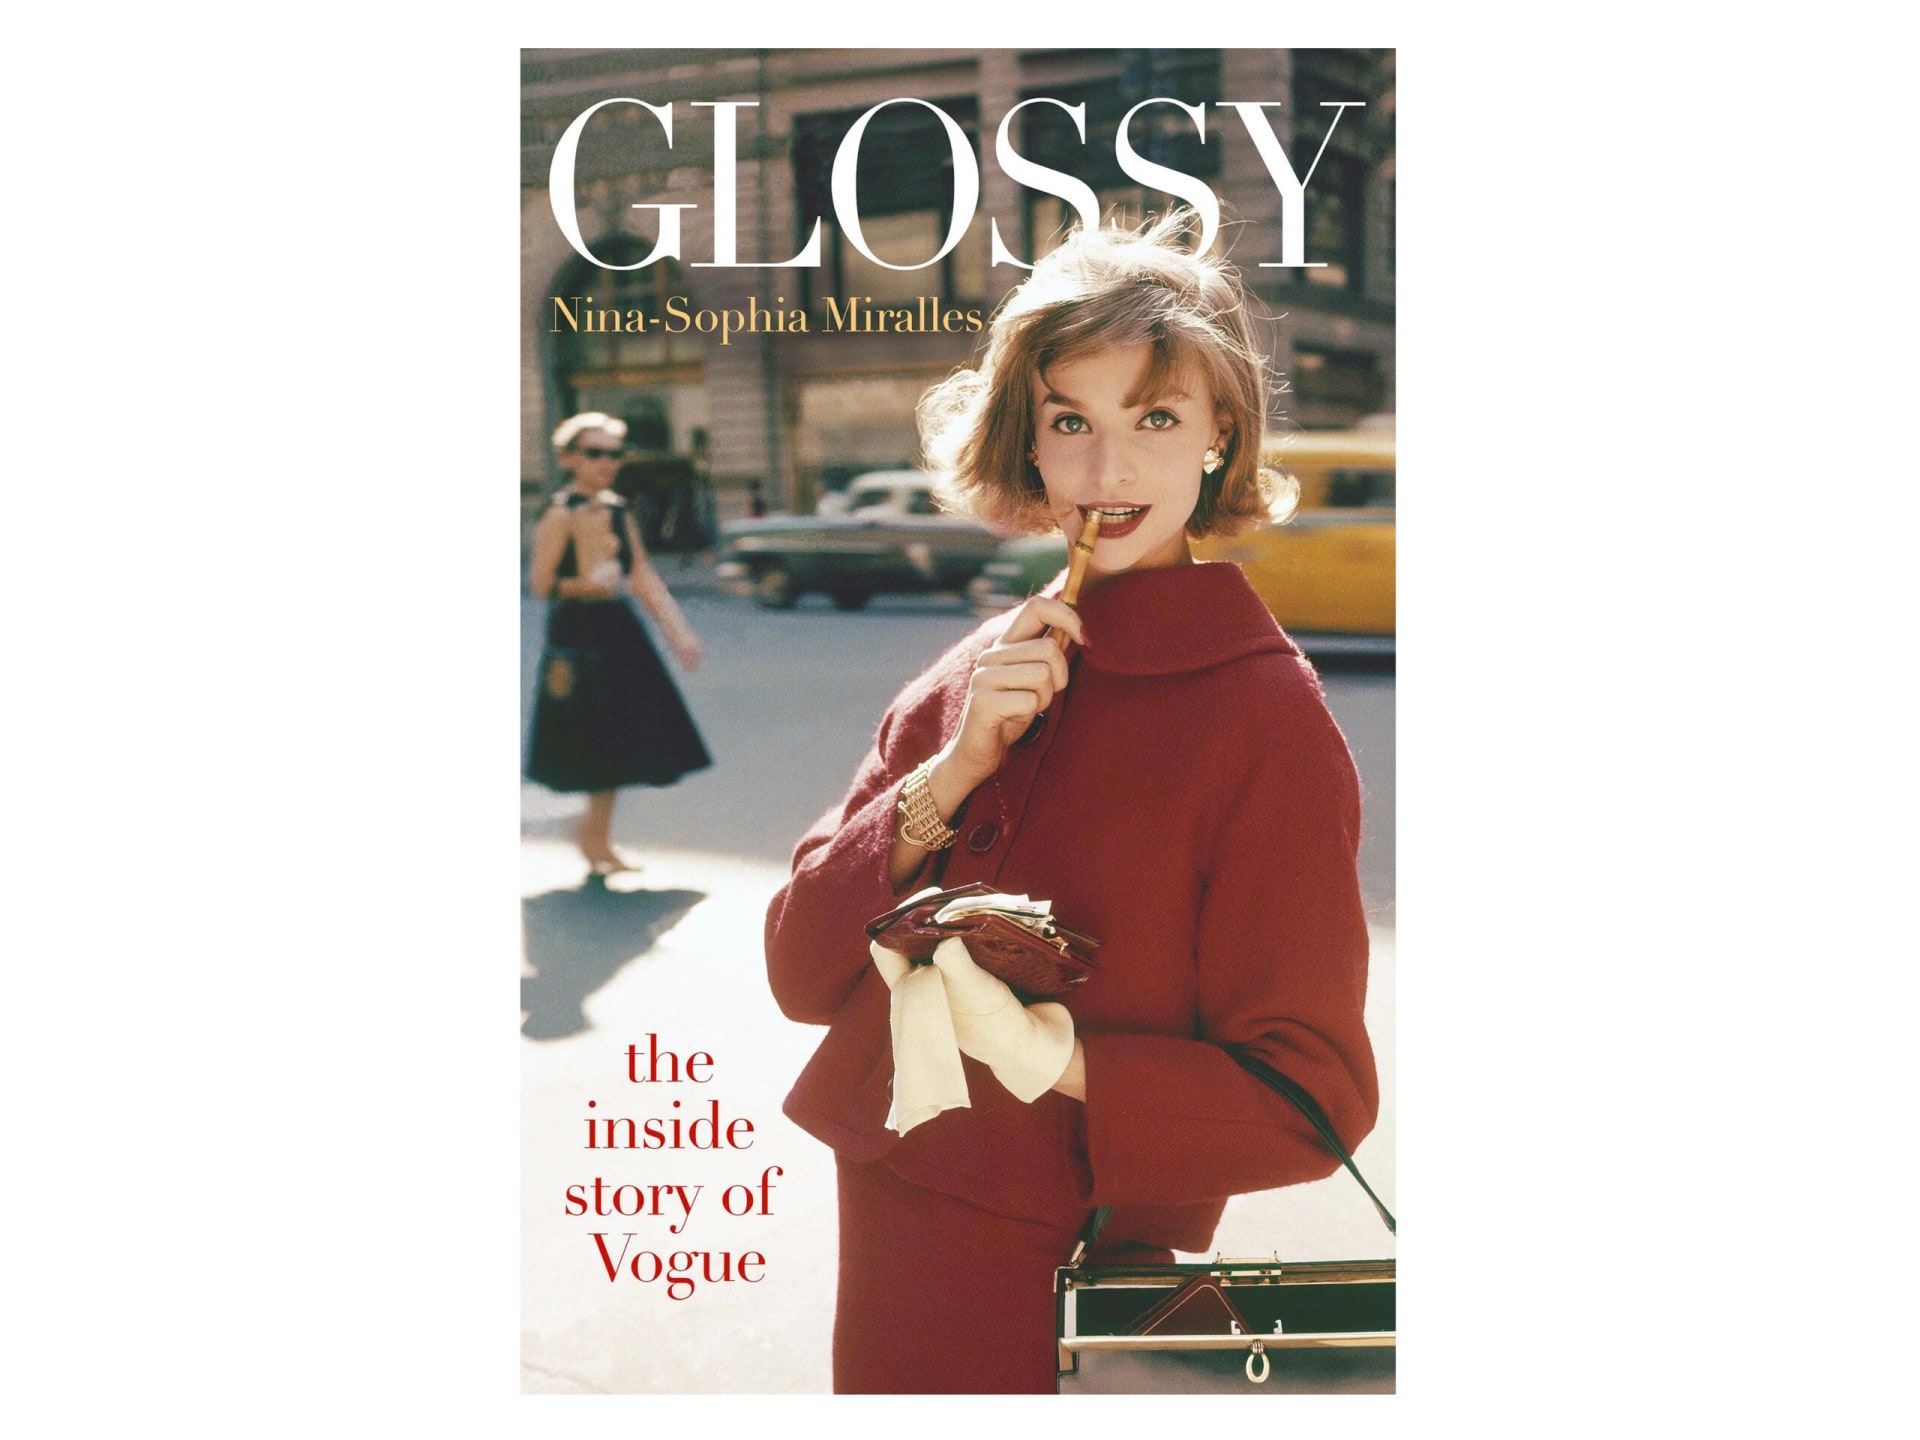 Glossy: The Inside Story of Vogue by Nina-Sophia Miralles, Quercus Publishing, $38